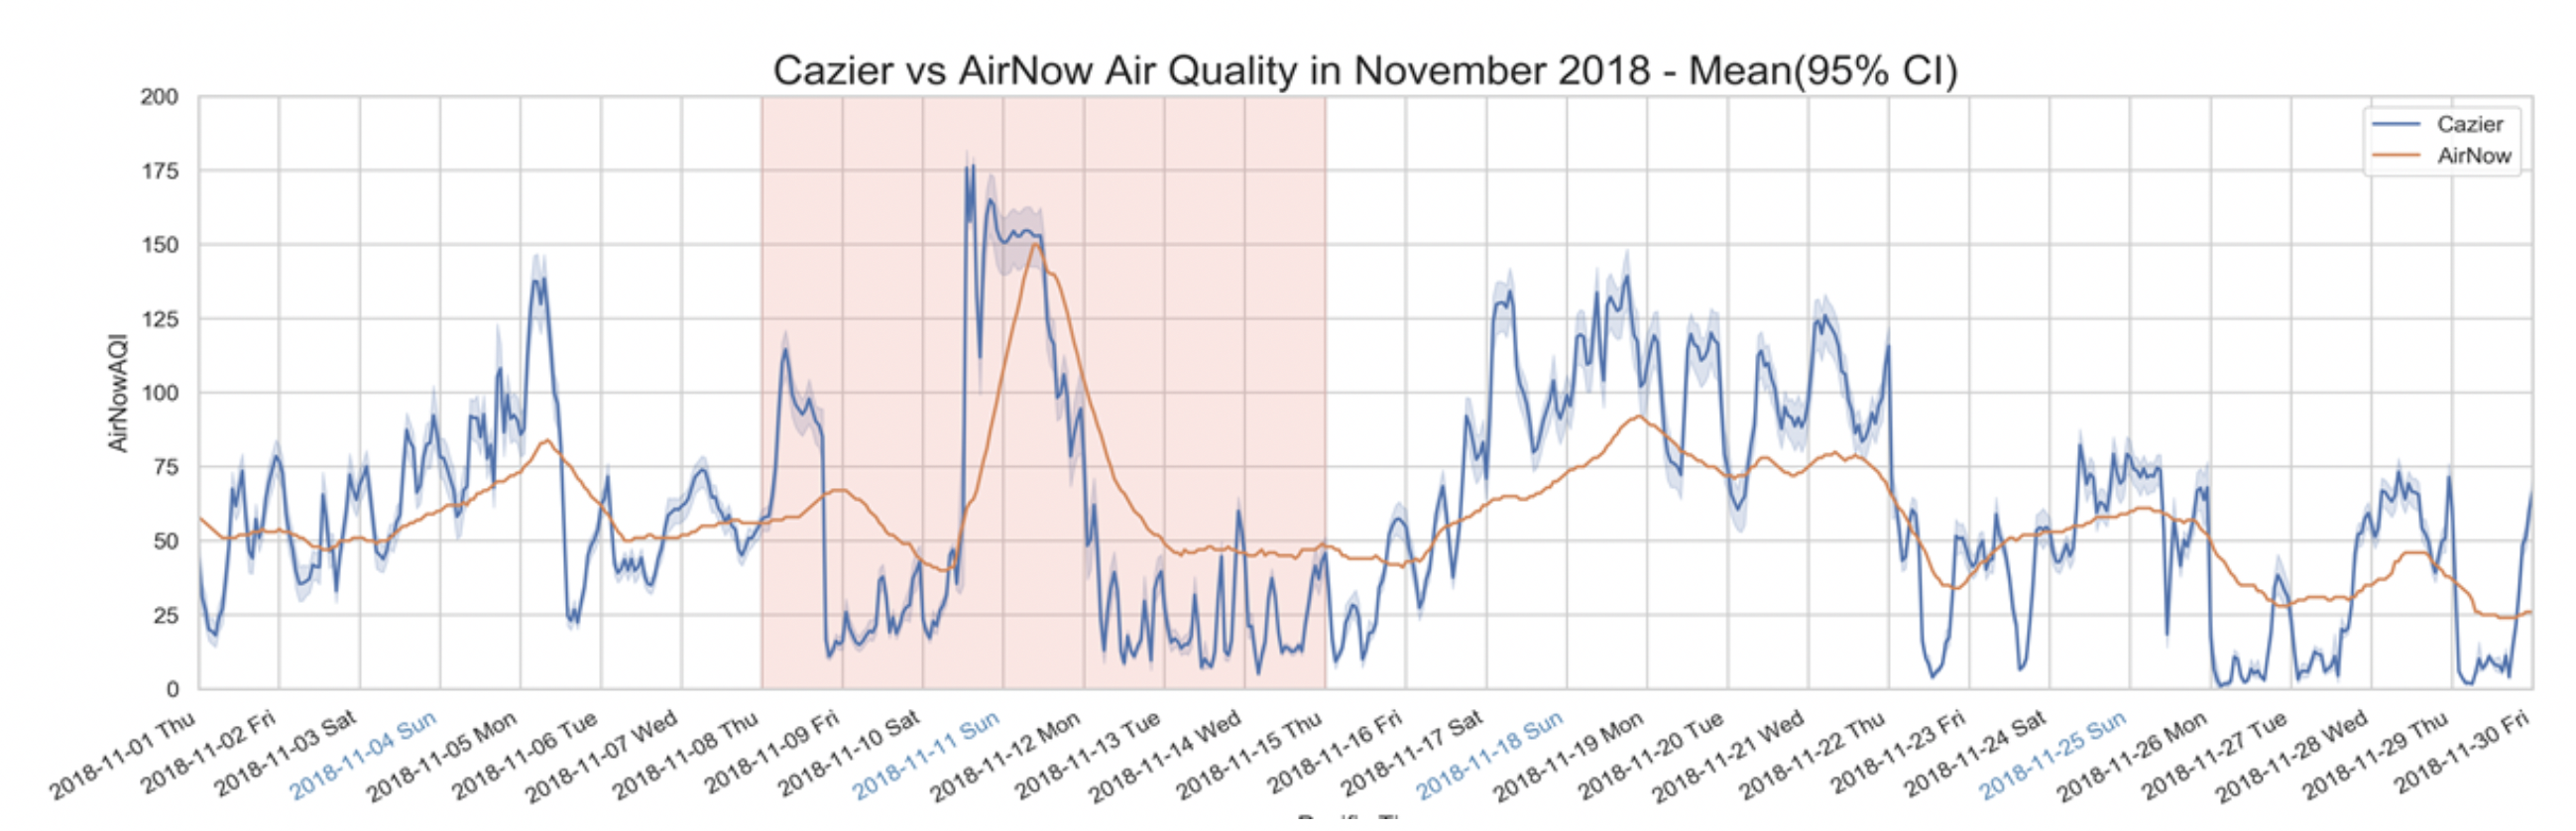 Air quality index as measured by AirNow and the team's PurpleAir sensors